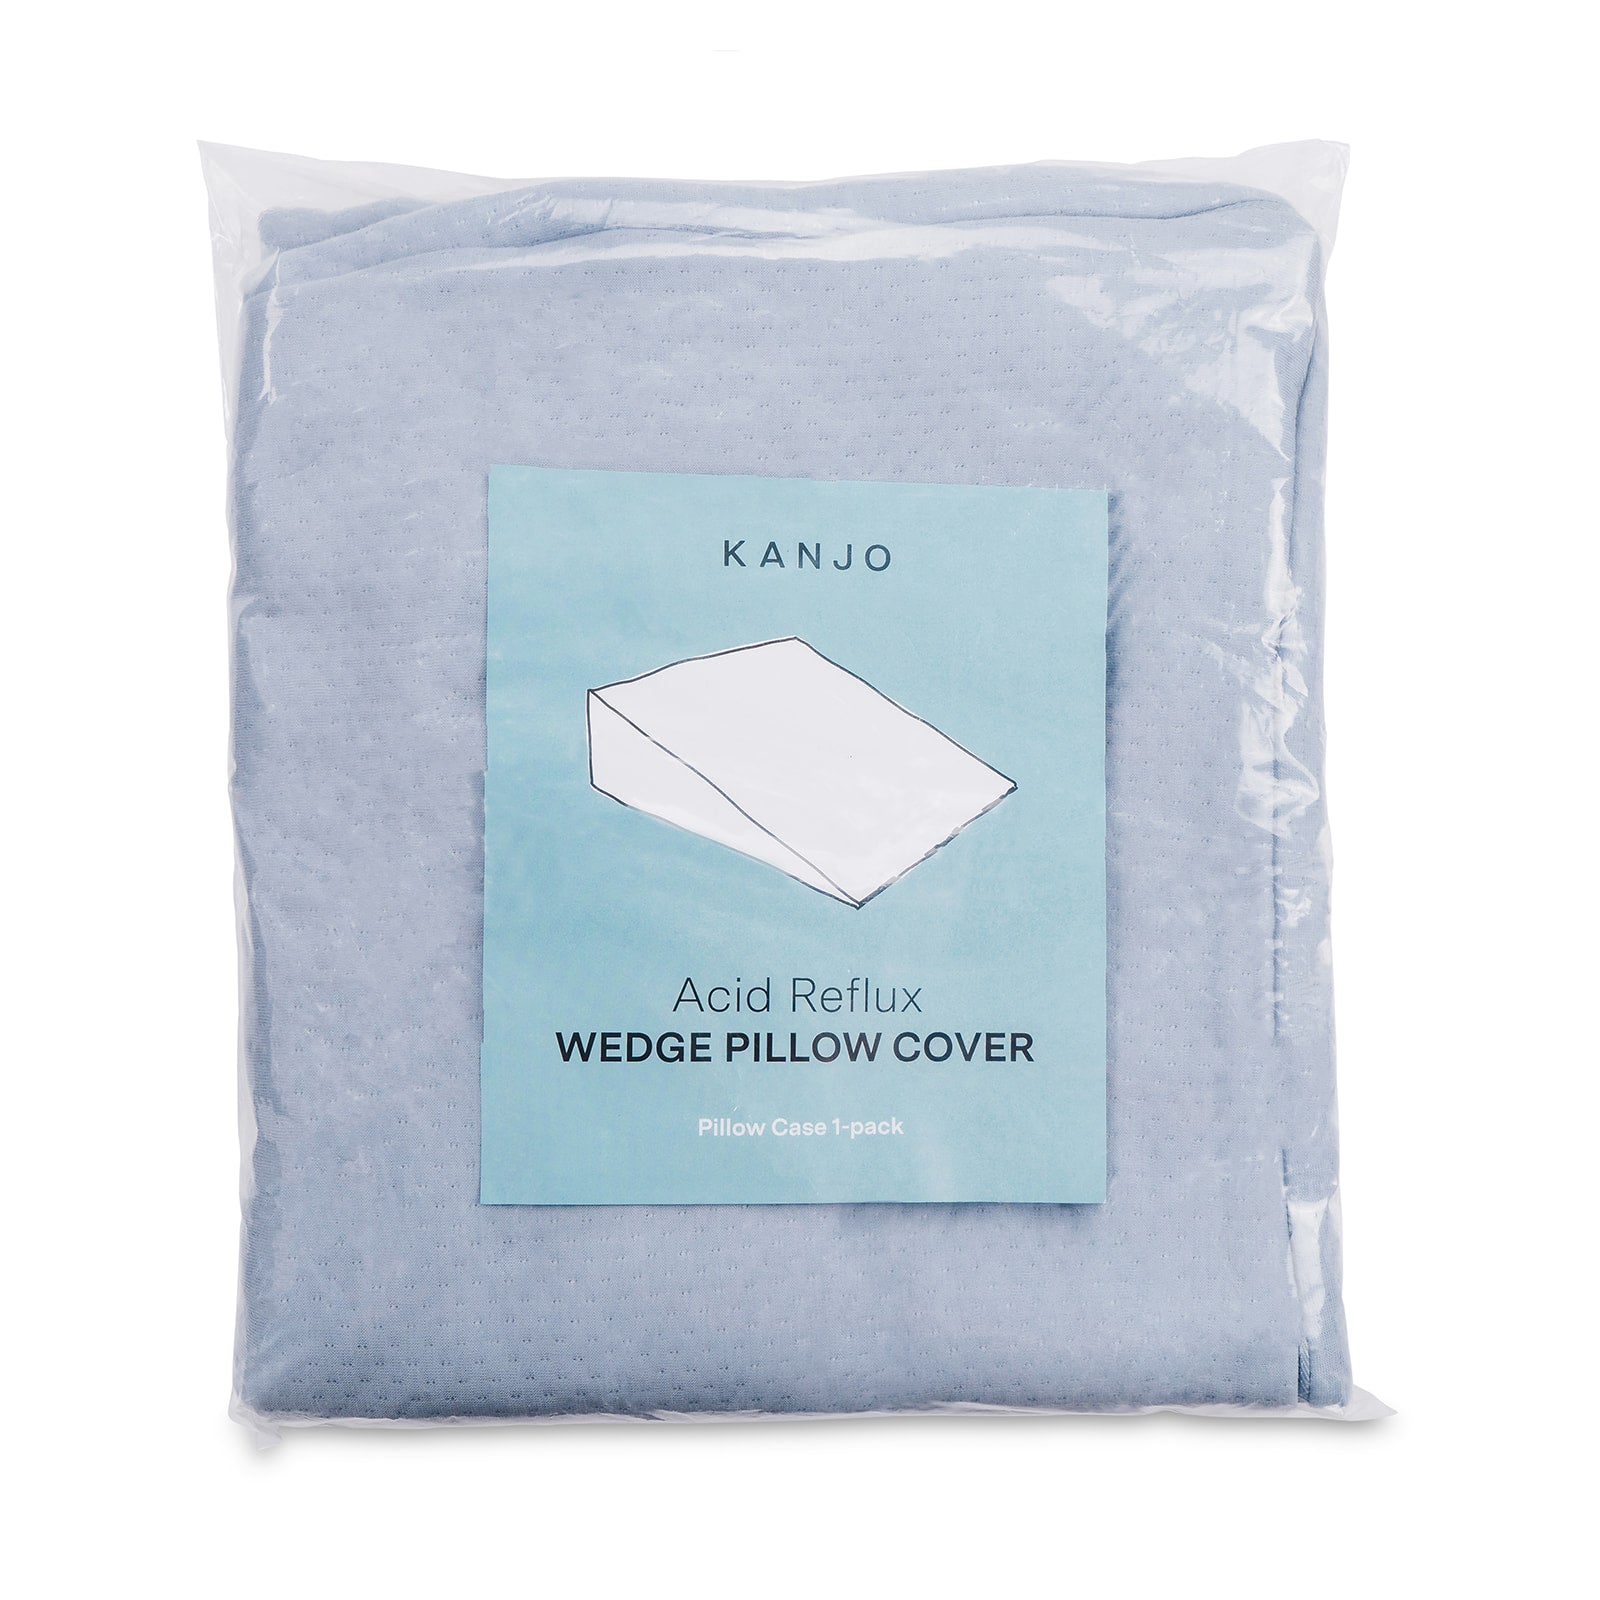 Kanjo Acid Reflux Wedge Pillow Replacement Cover